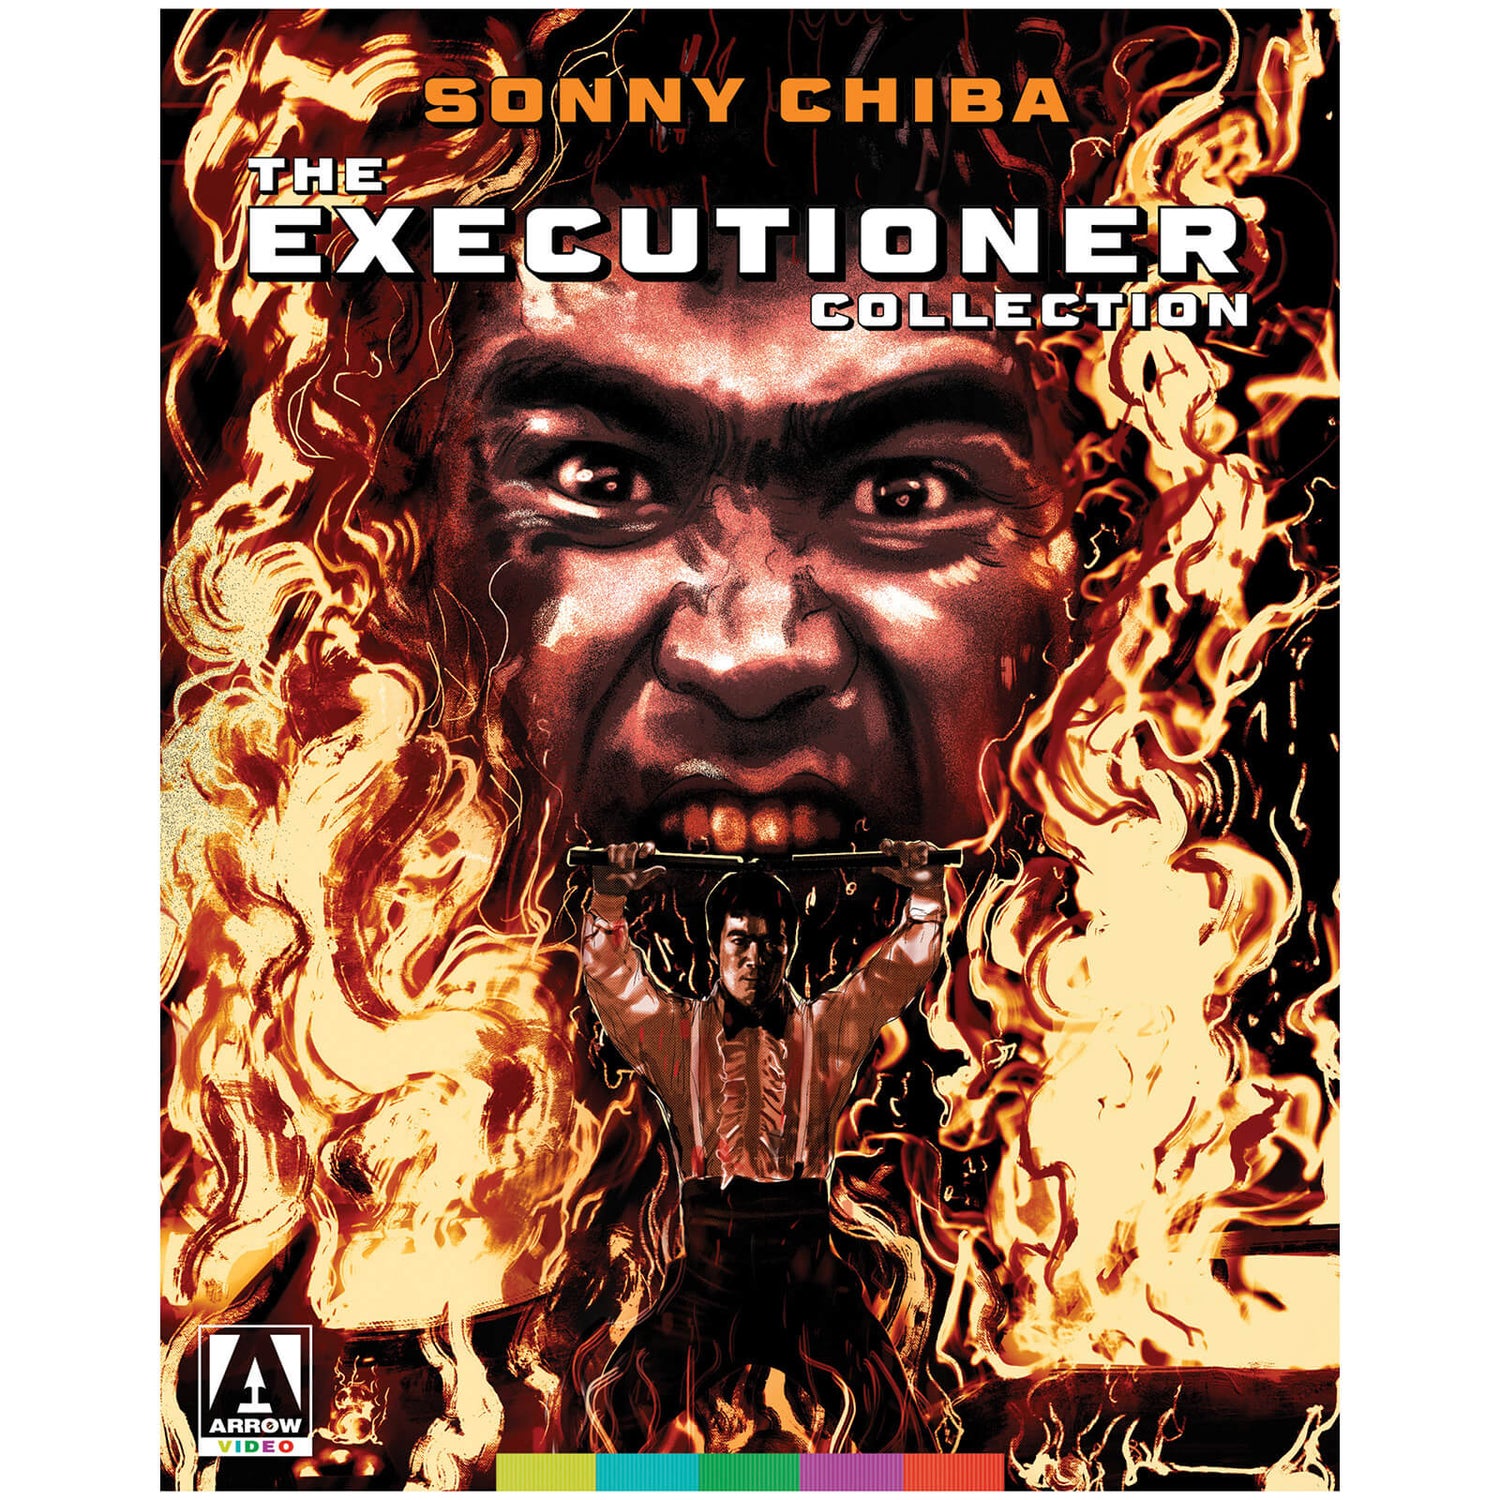 The Executioner Collection Blu-ray